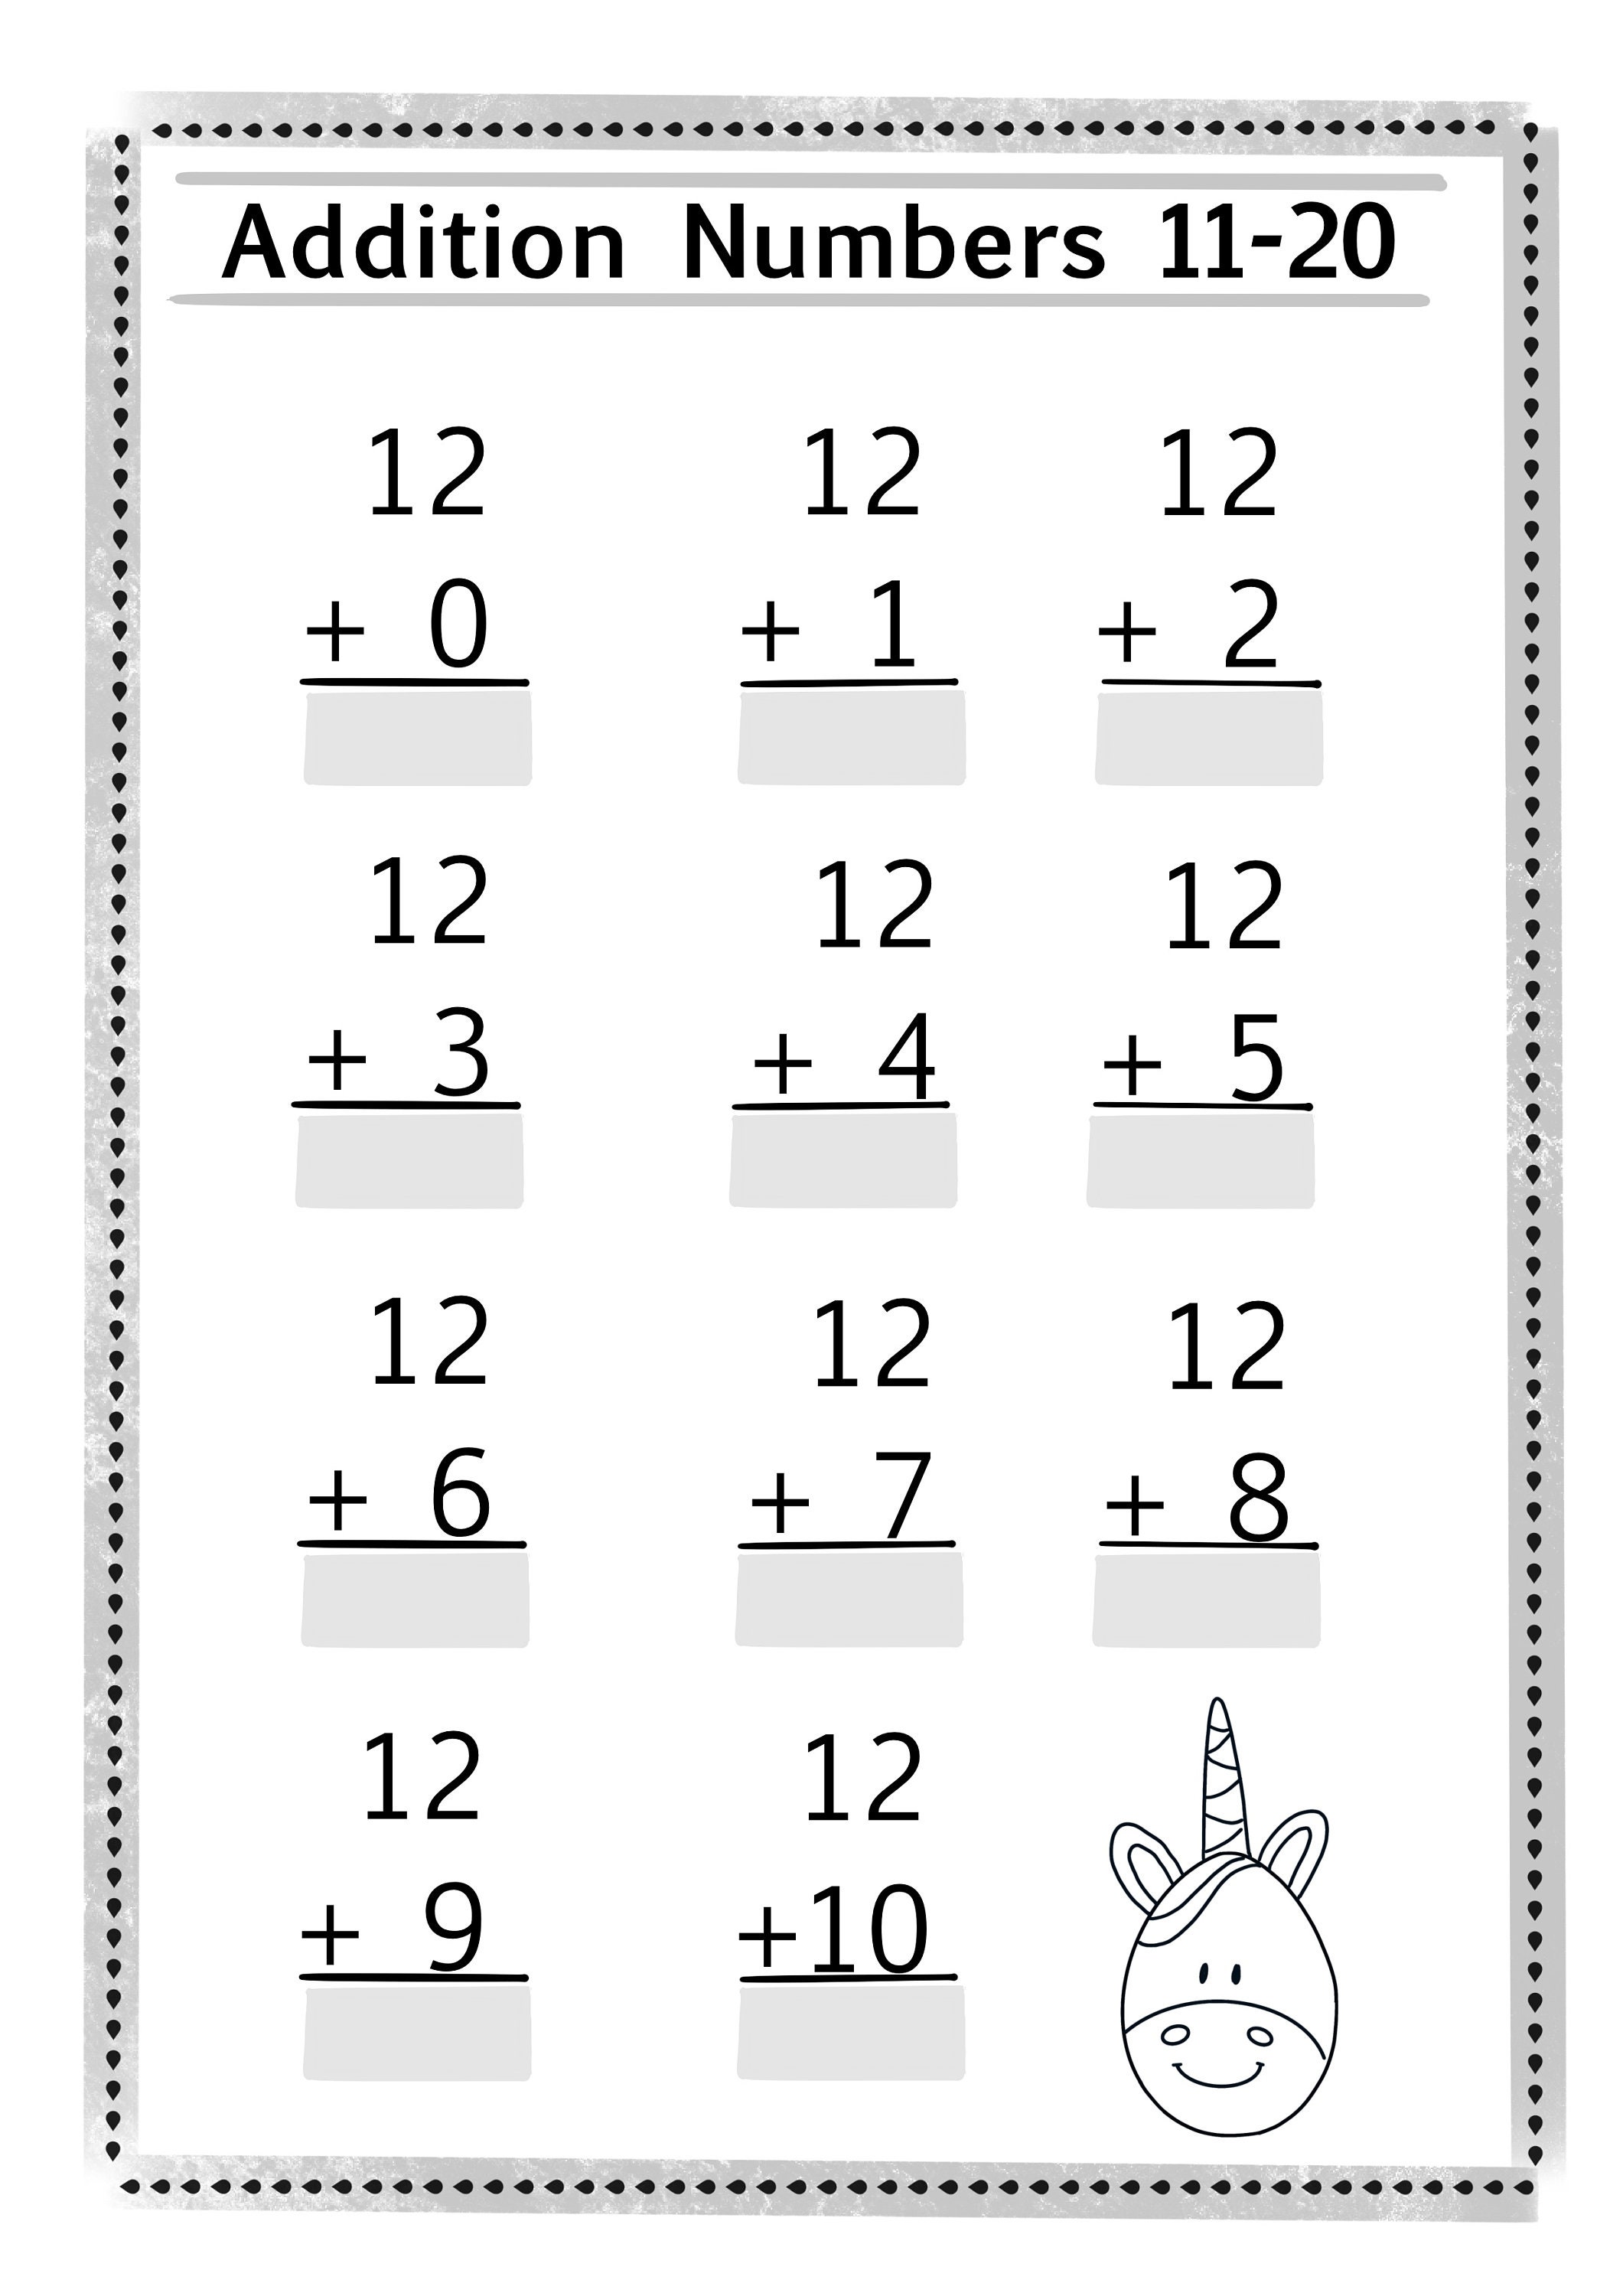 download-pdf-20-printable-addition-worksheets-numbers-11-20-etsy